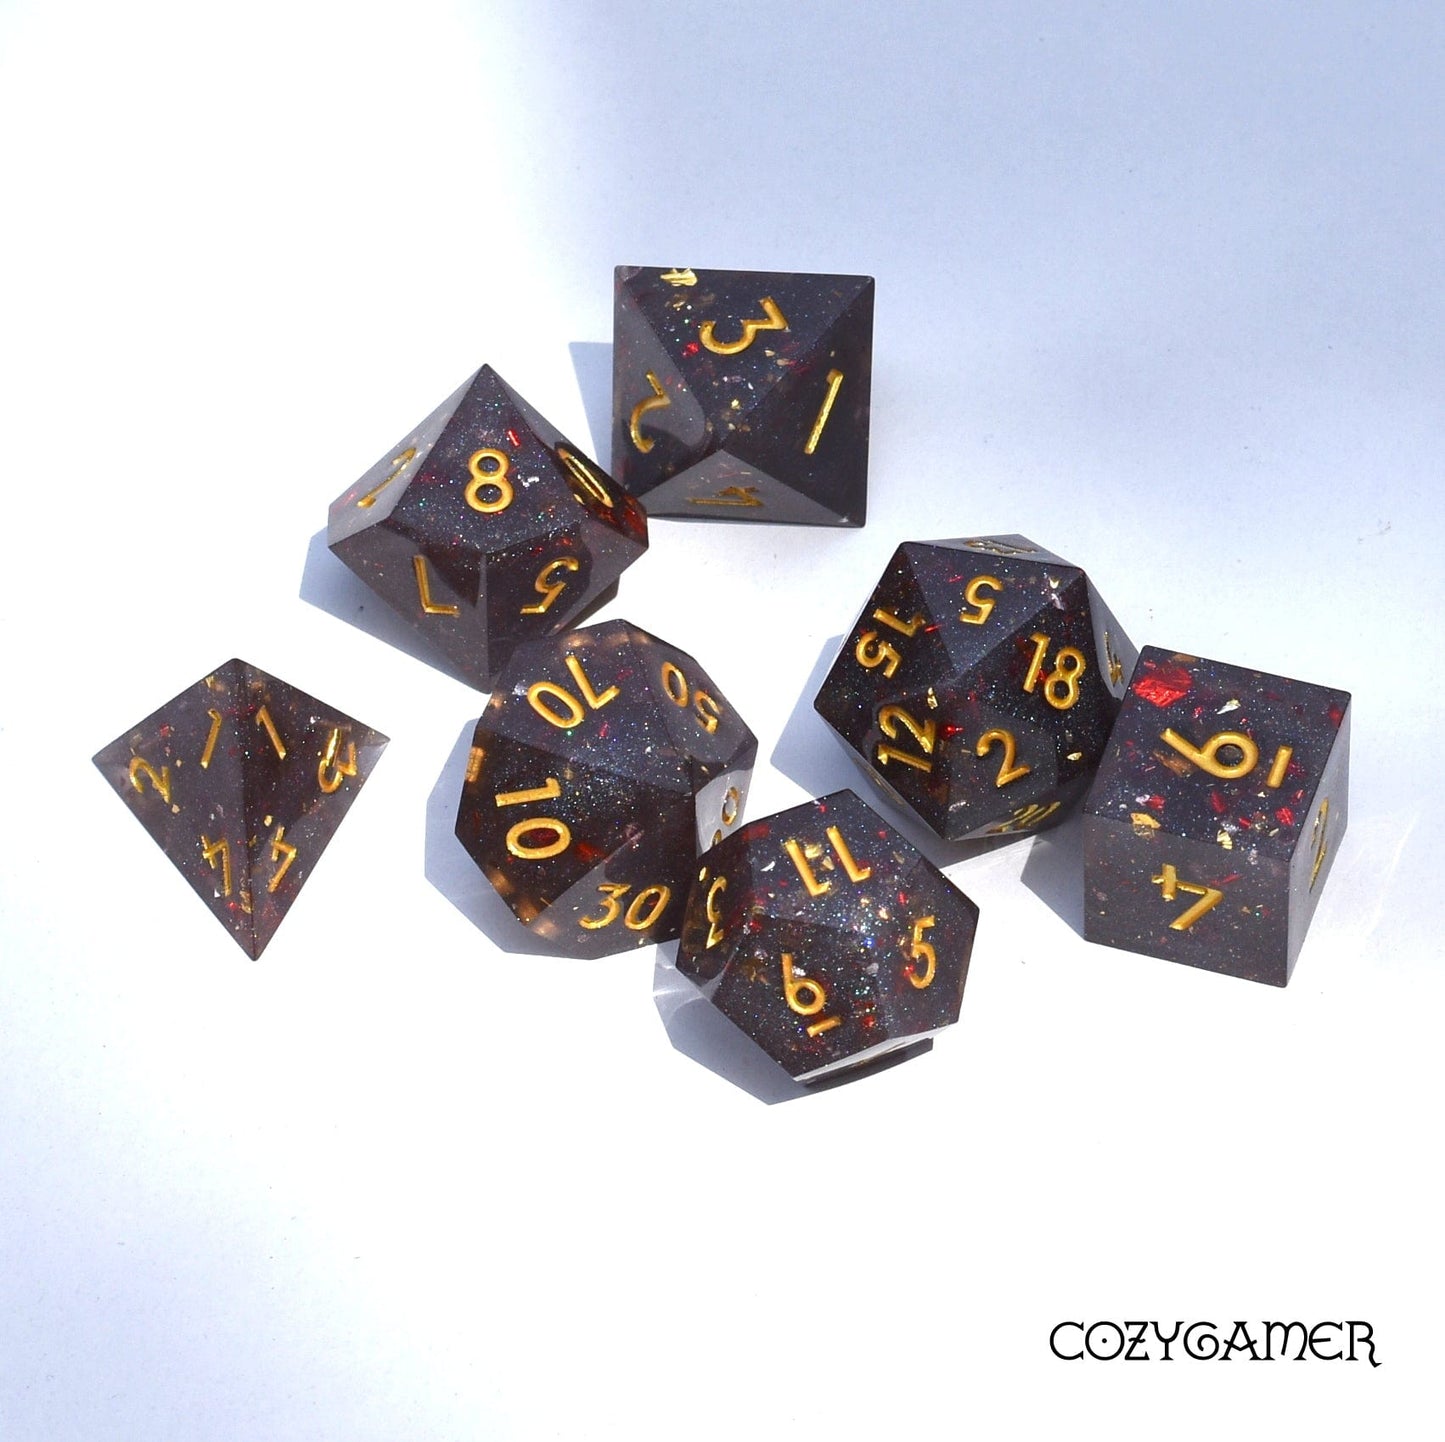 Volcanic Ash Sharp Edge Dice Set. Grey shimmering glitter and red flakes